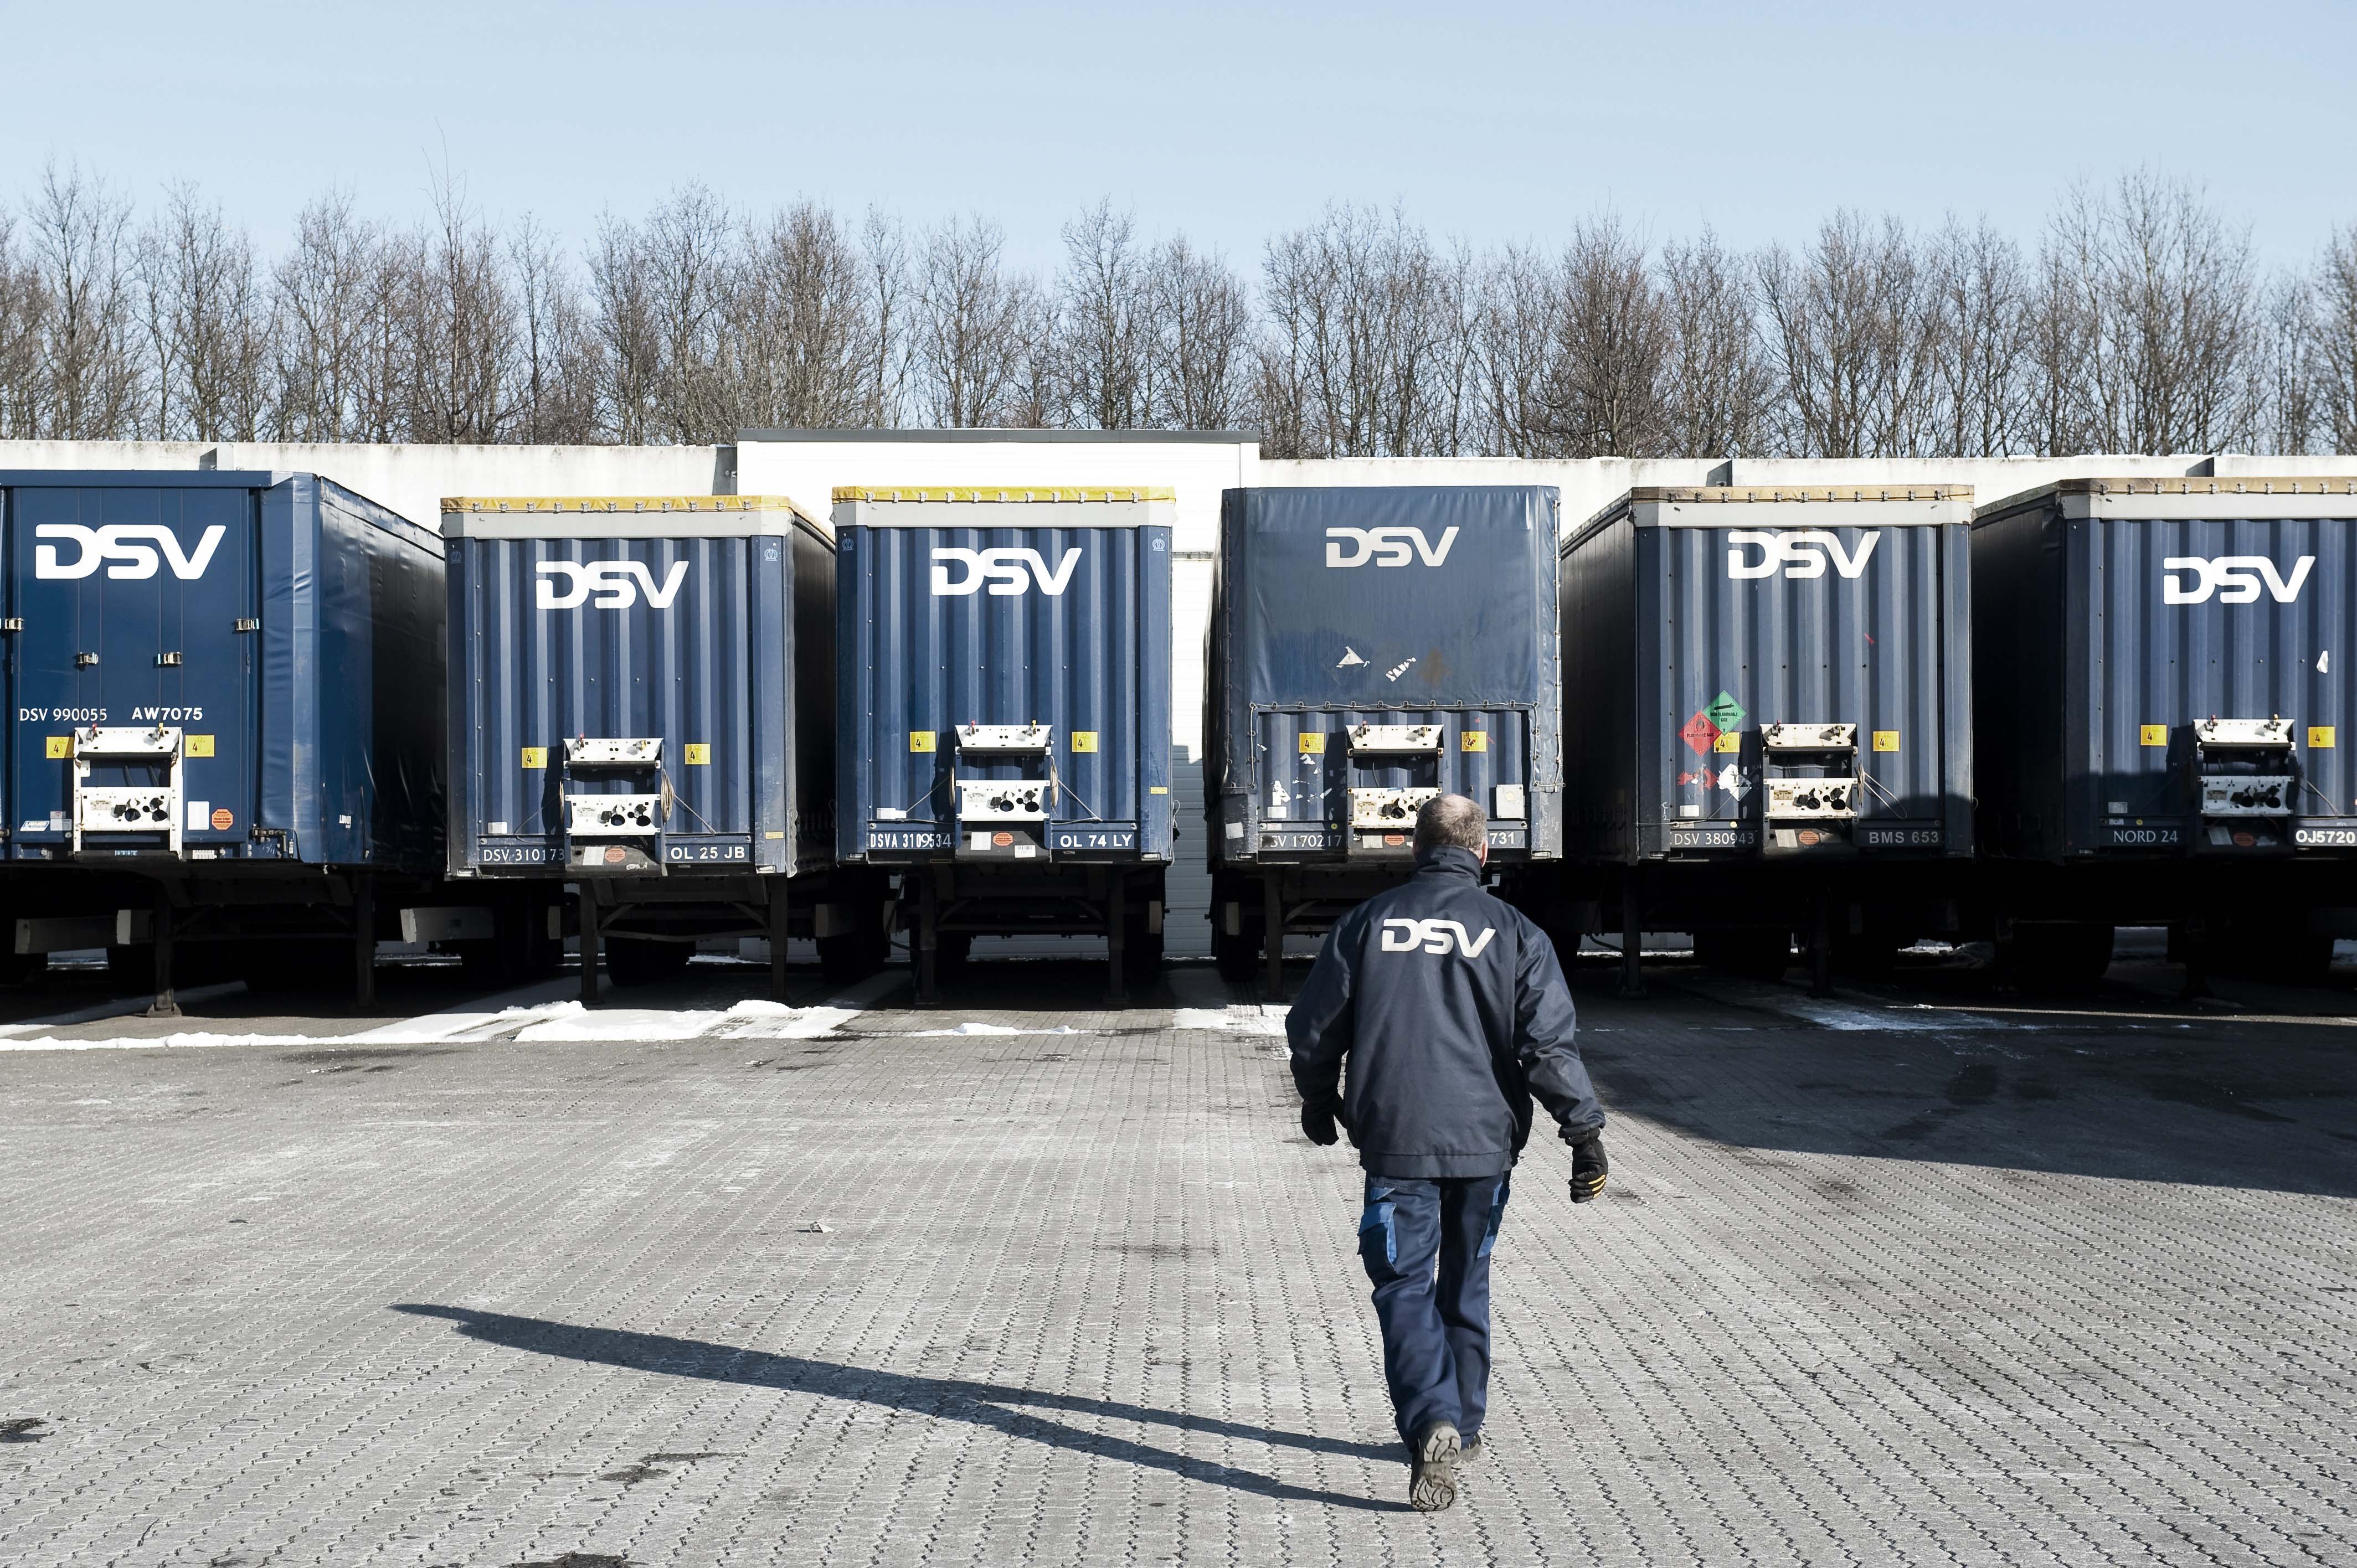 Business news in brief: Danish transport giant makes huge US acquisition